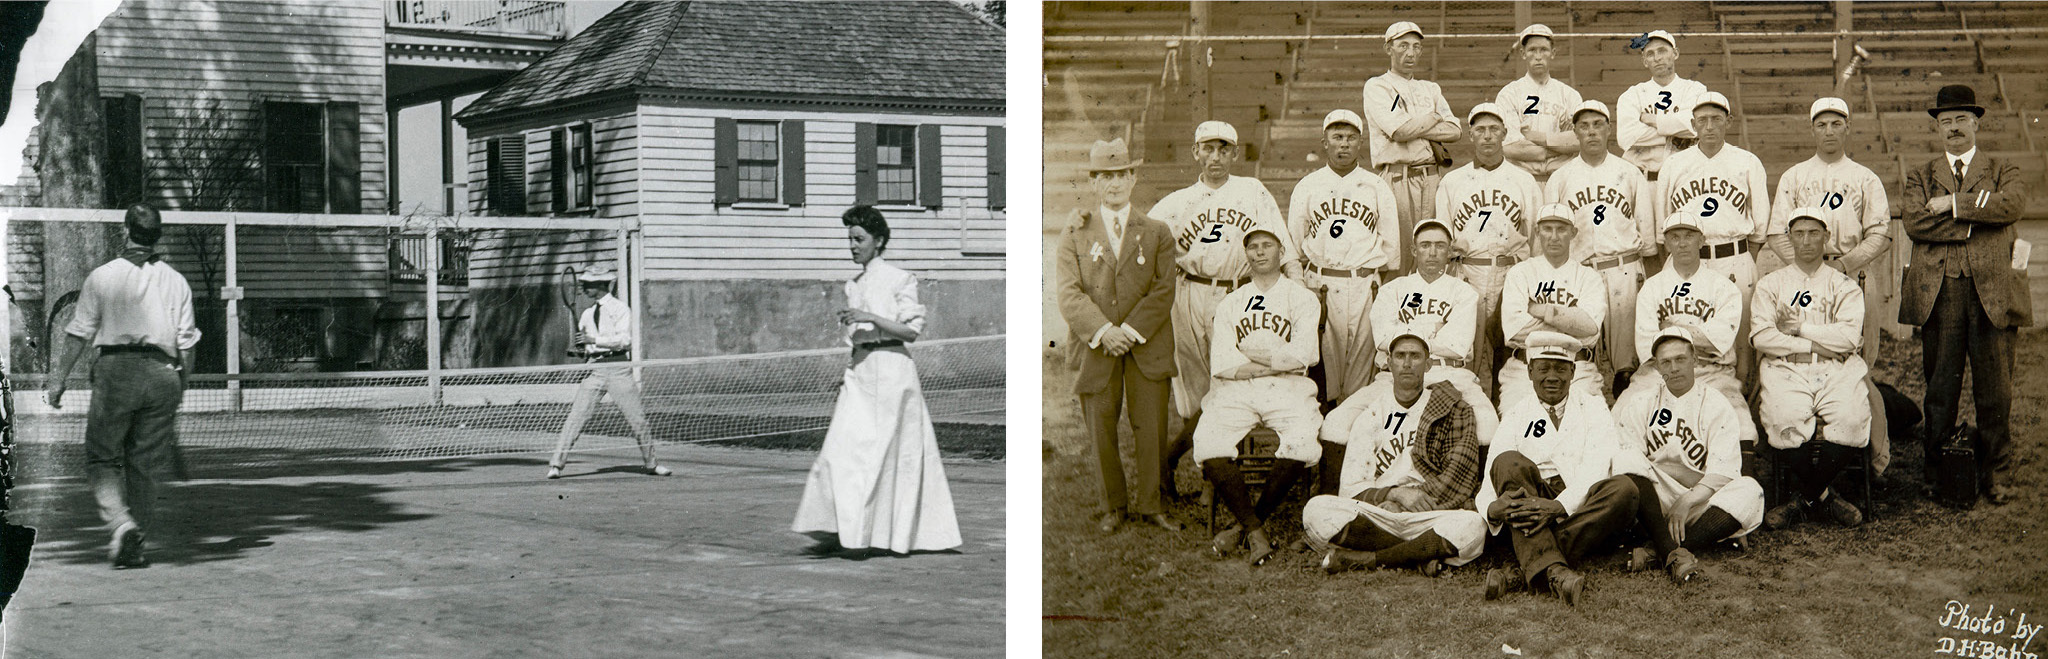 Doubles game at Charleston Country Club, c. 1920 by M.B. Paine<br>Charleston Sea Gulls, 1914 by David H. Bahr